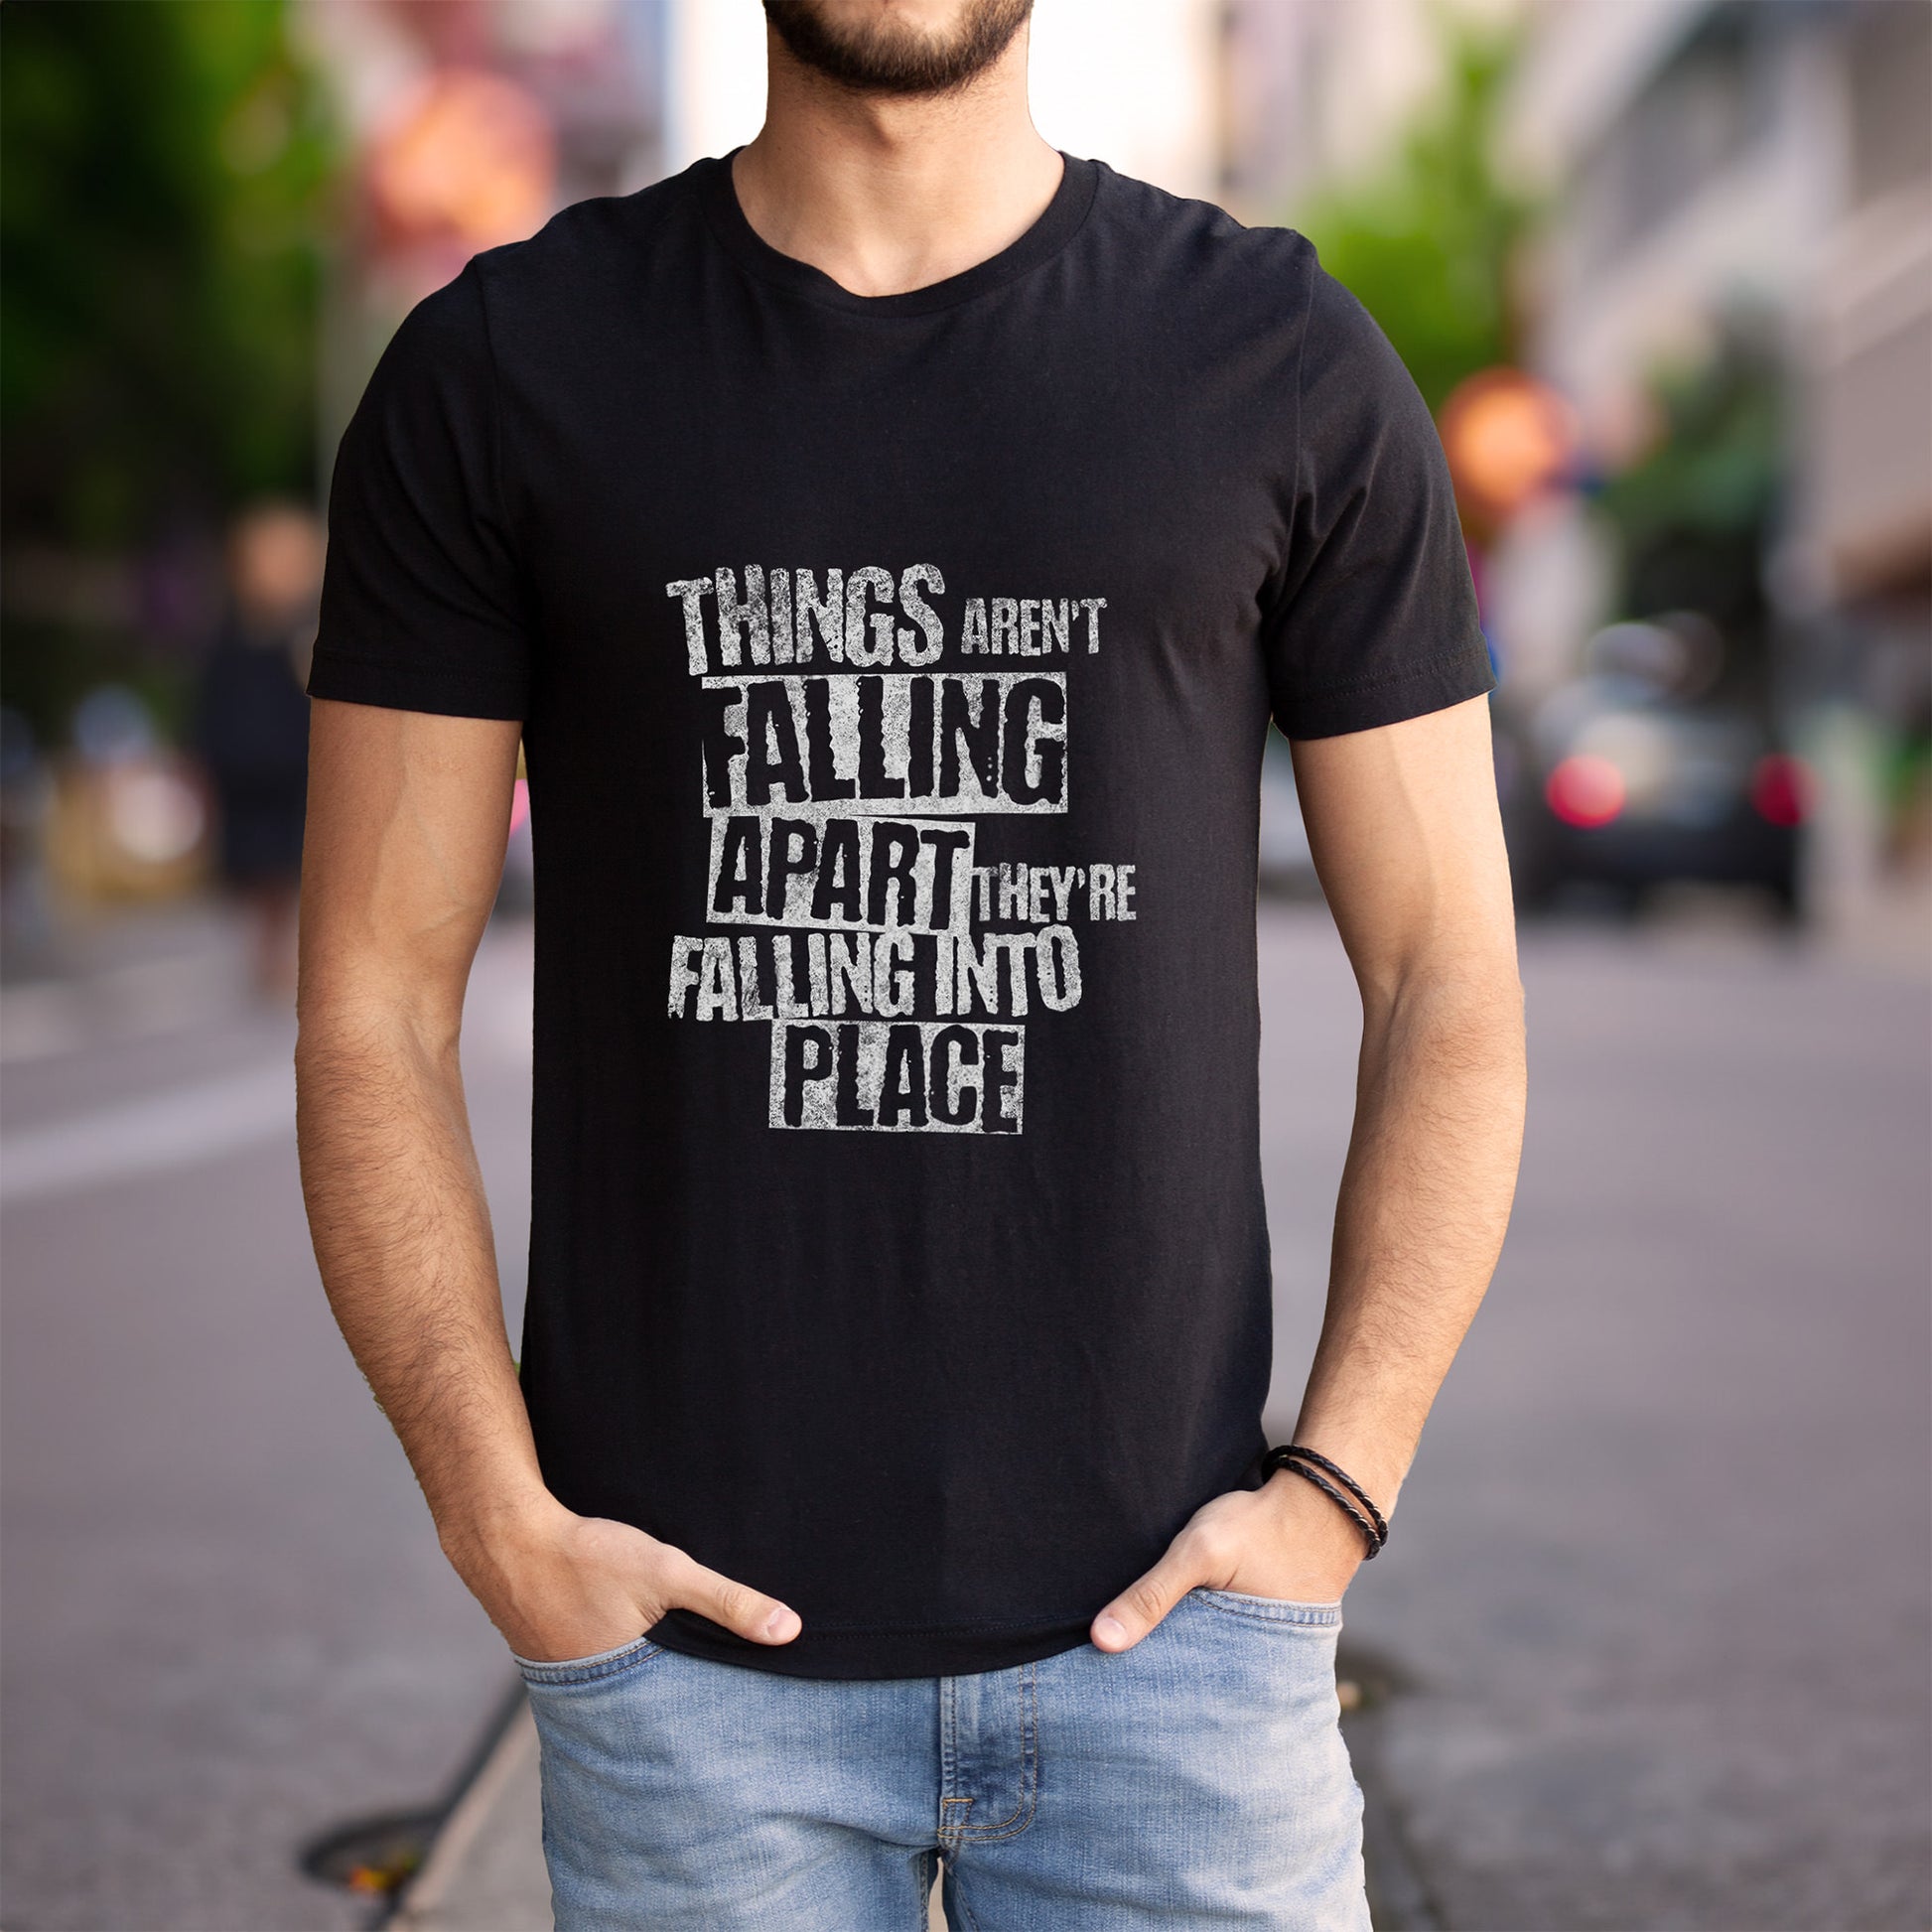 Things aren't falling apart they're falling into place t-shirt in vintage black